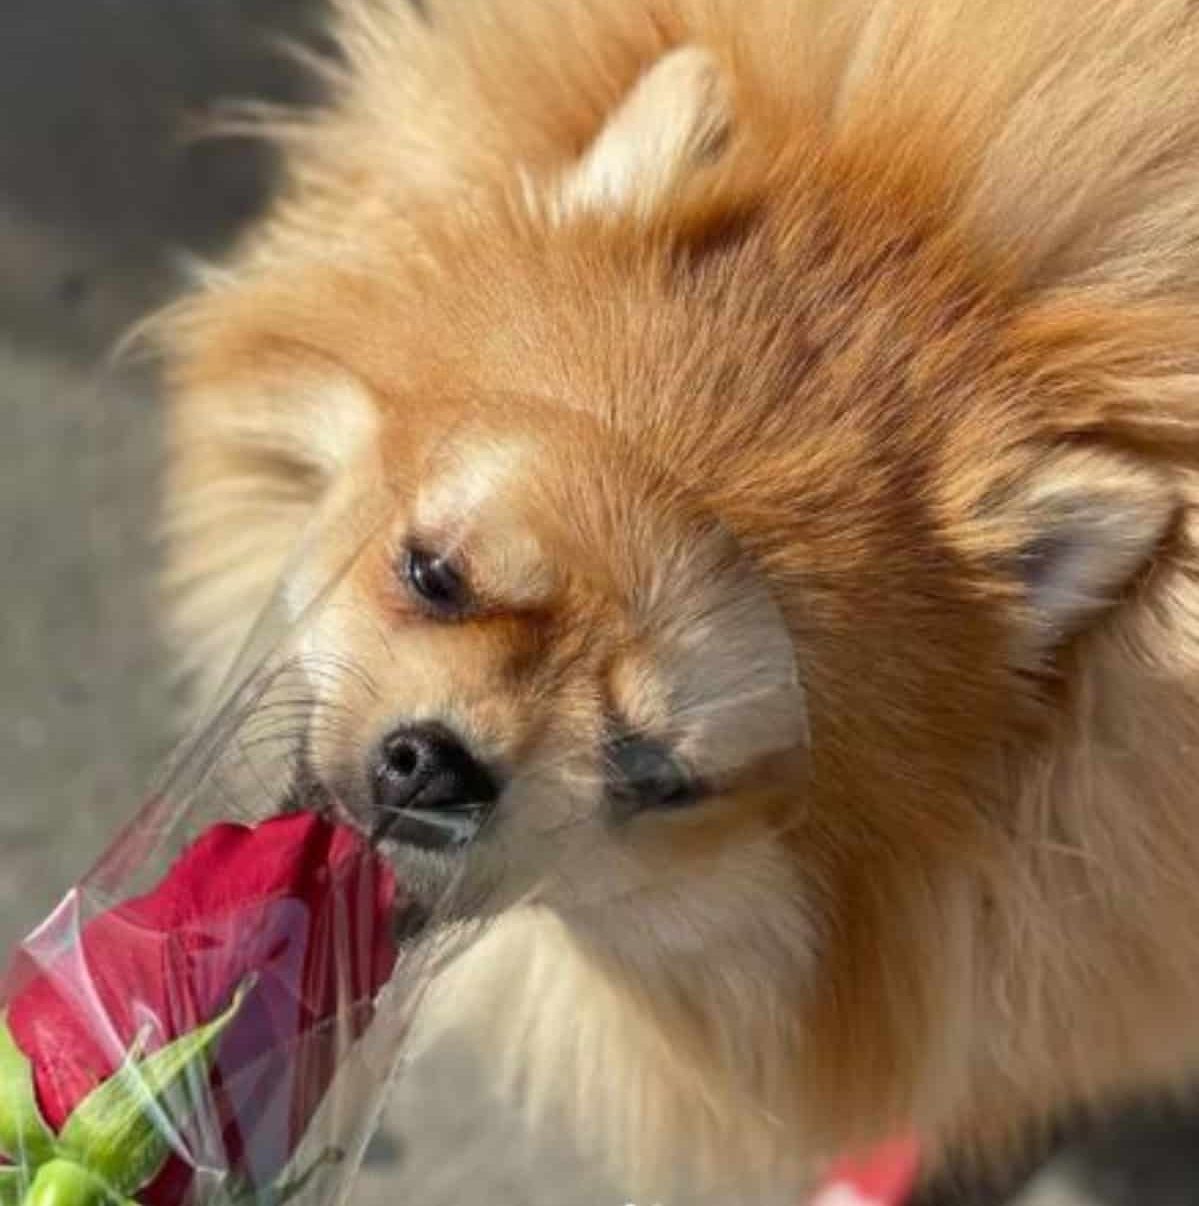 *dog smelling the rose with silly face